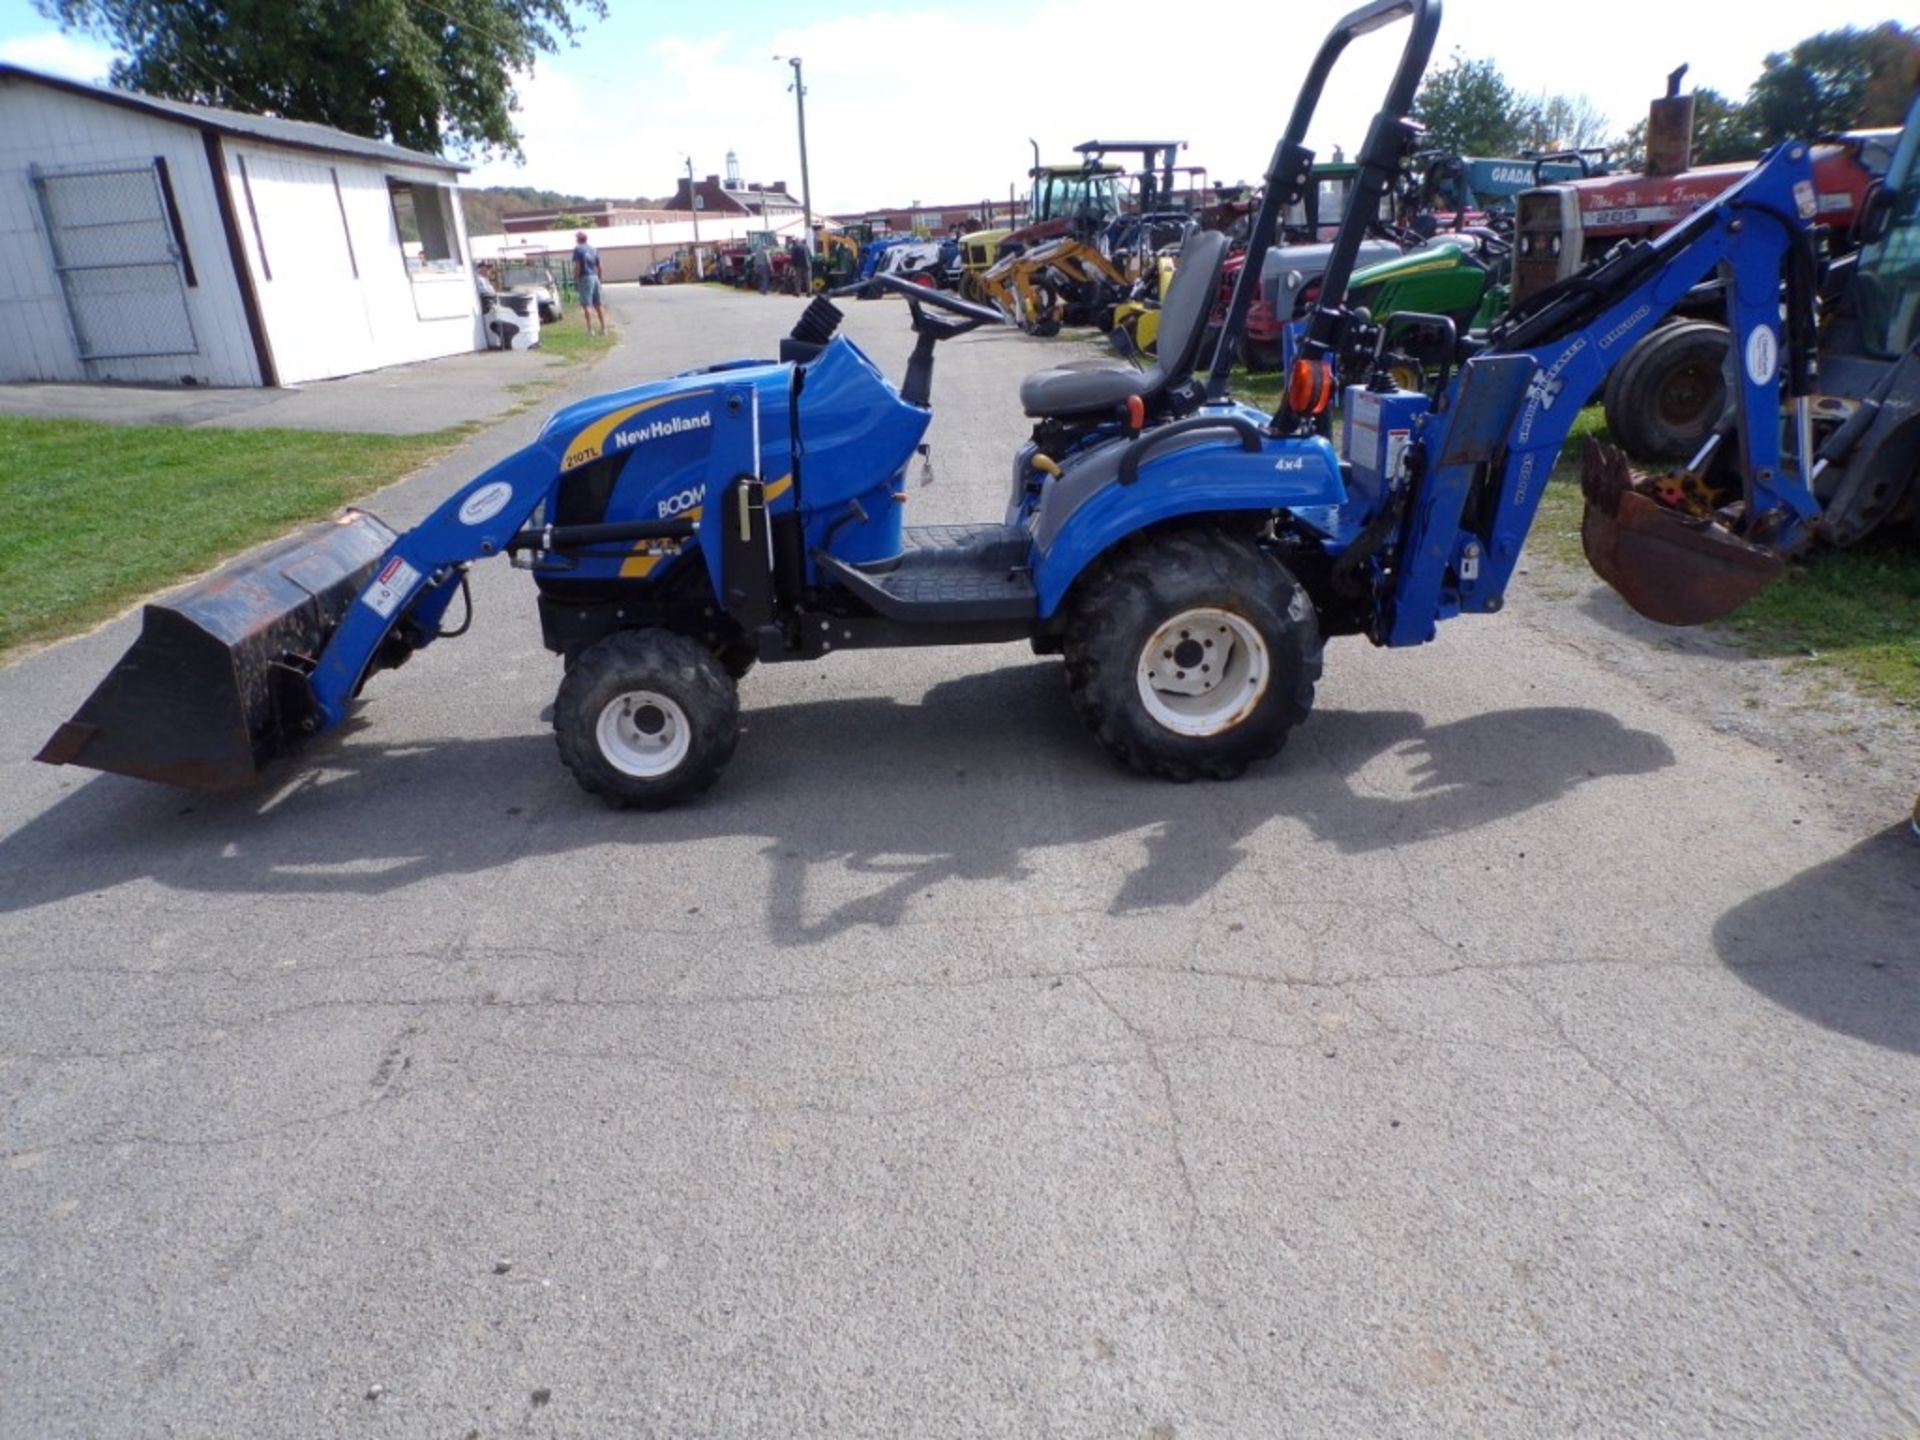 New Holland Boomer 1025 Tractor, 4 WD, Shibaura Dsl. Engine, N.H. 210TL Loader ARms And 48'' Bucket, - Image 3 of 6